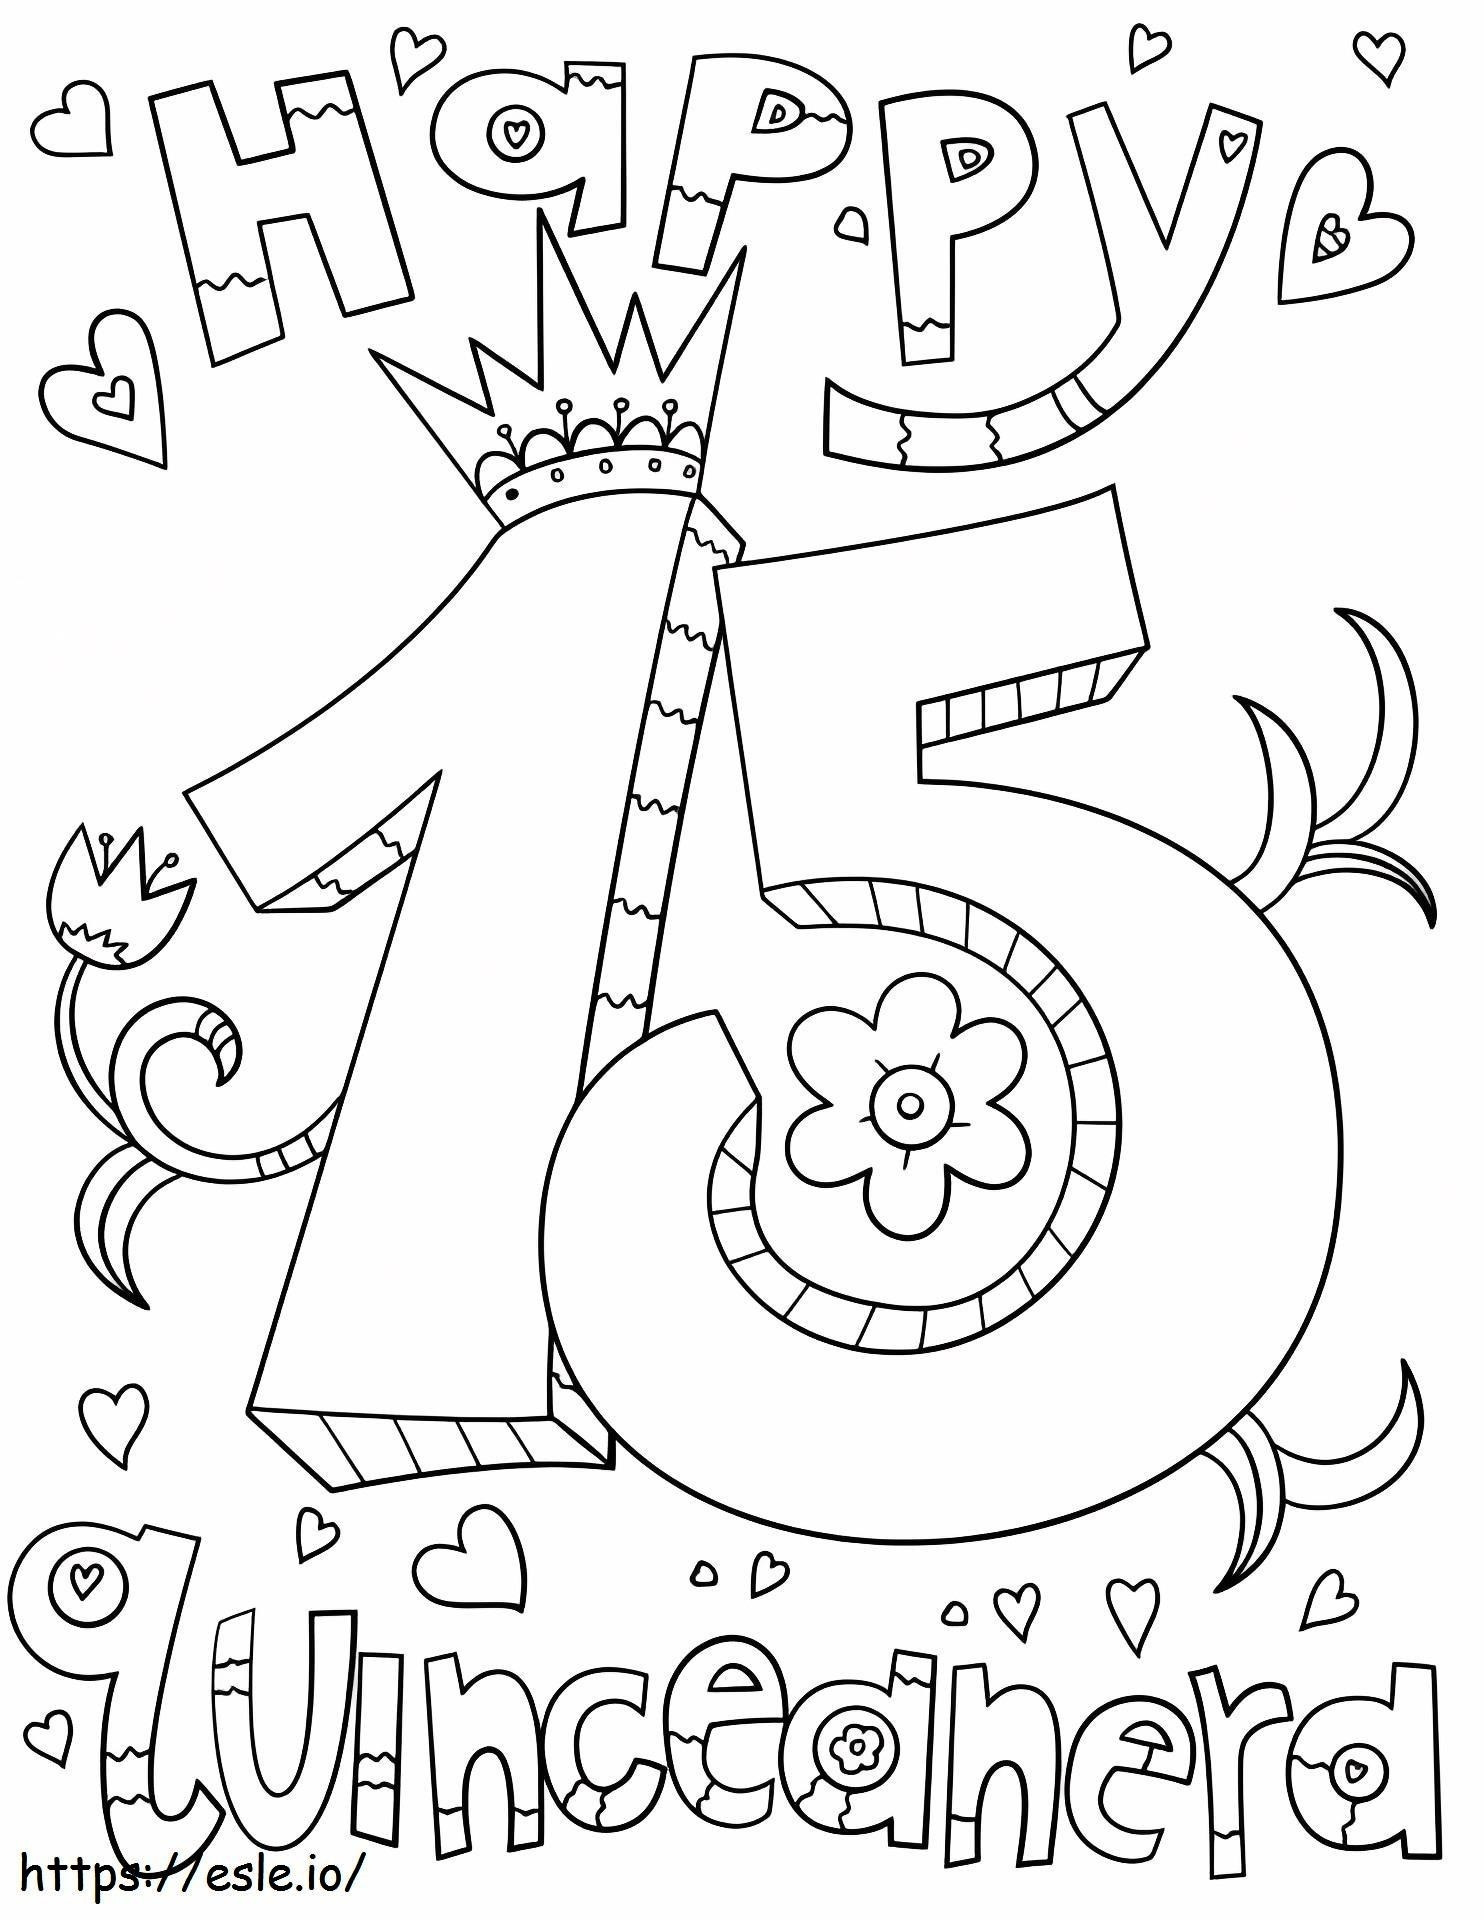 1527062454_Happy Quinceanera coloring page